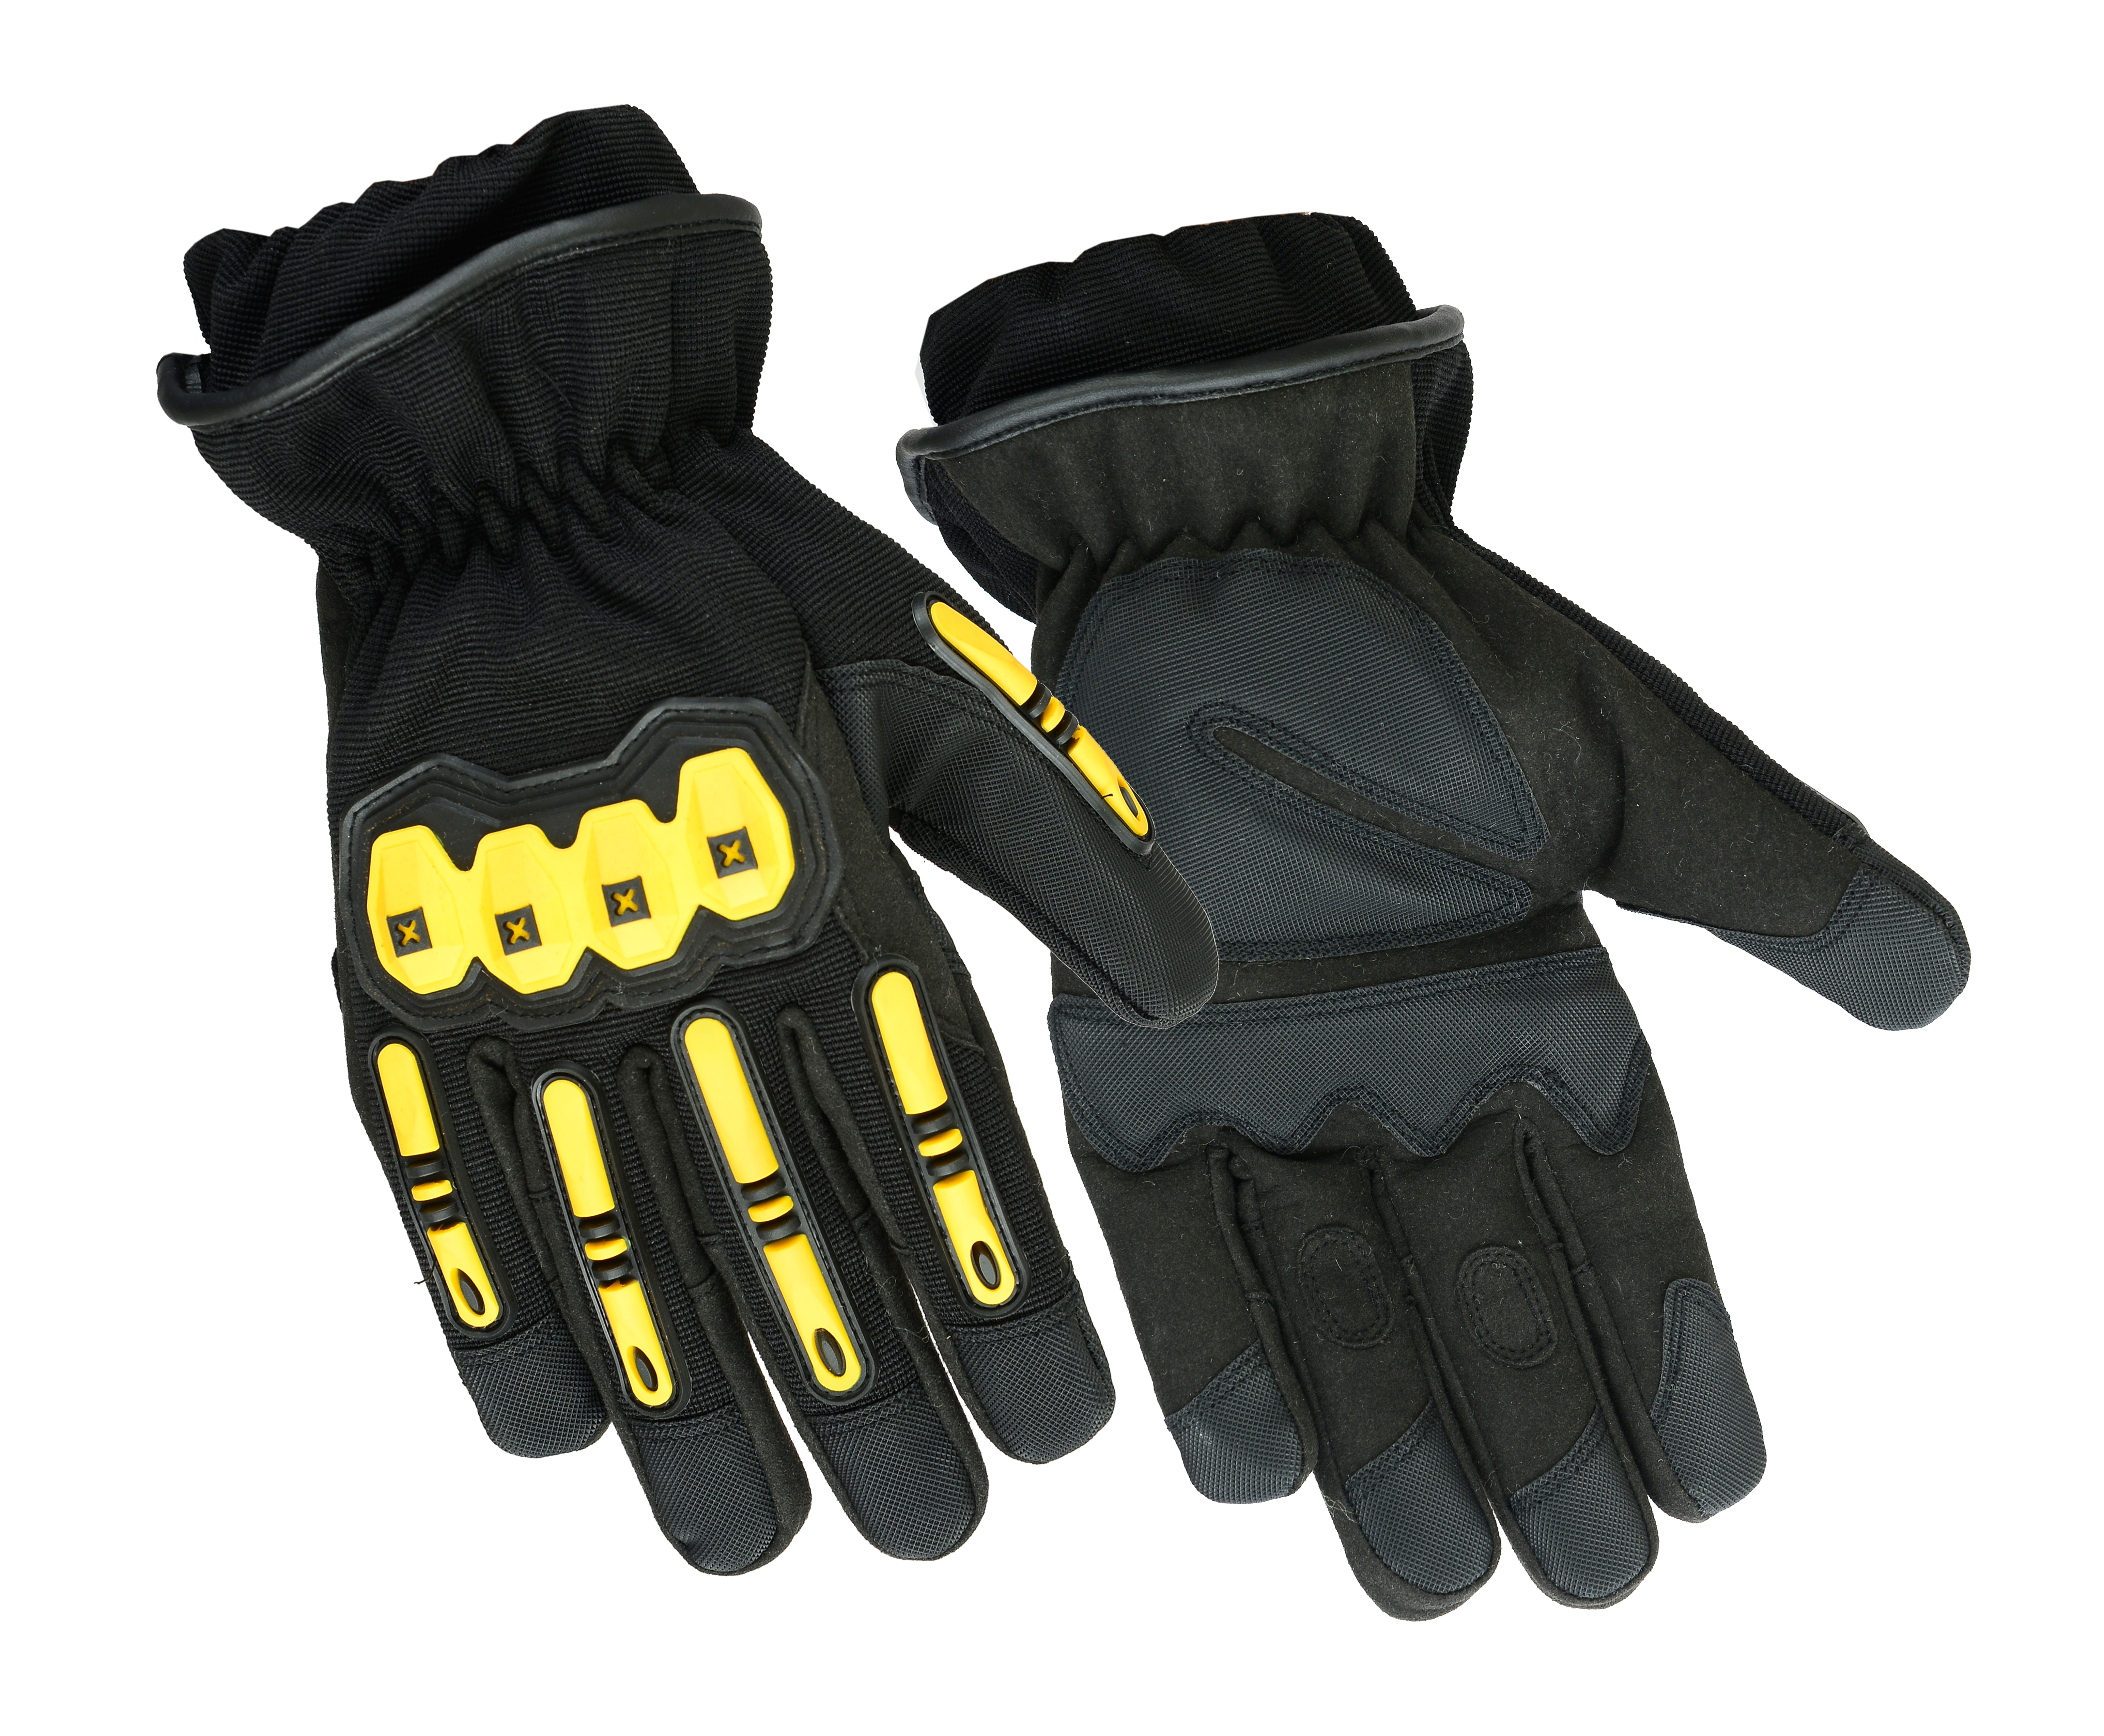 Fire Resistant Extrication Hard Knuckle Protective Glove